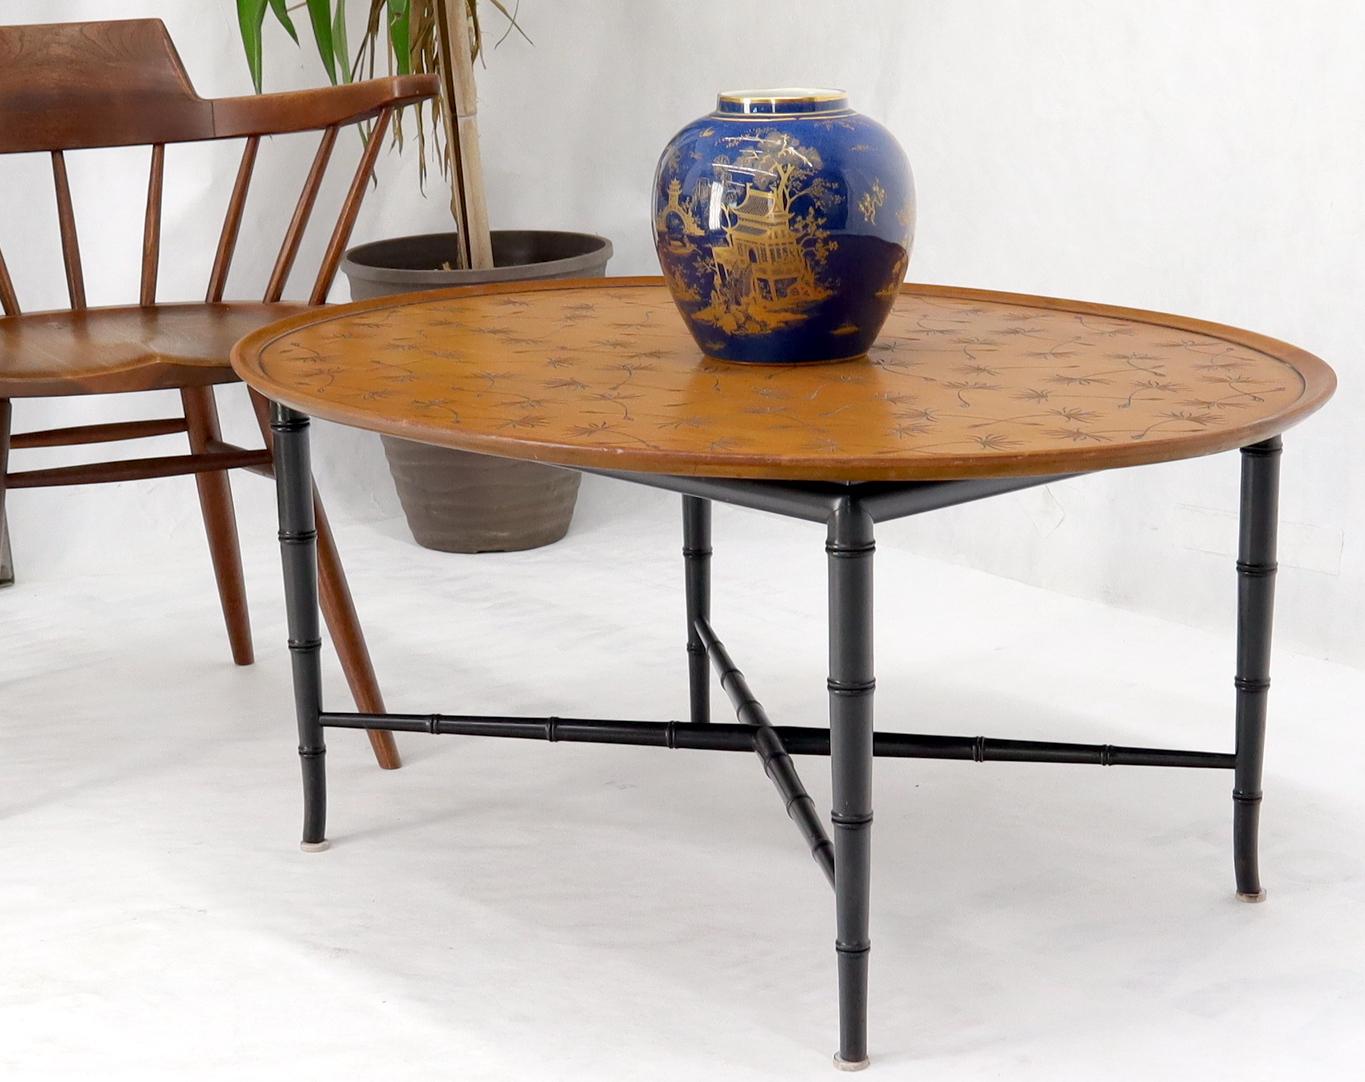 20th Century Oval Kittinger Coffee Table Faux Bamboo Tapered Legs Incised Leafs Design on Top For Sale